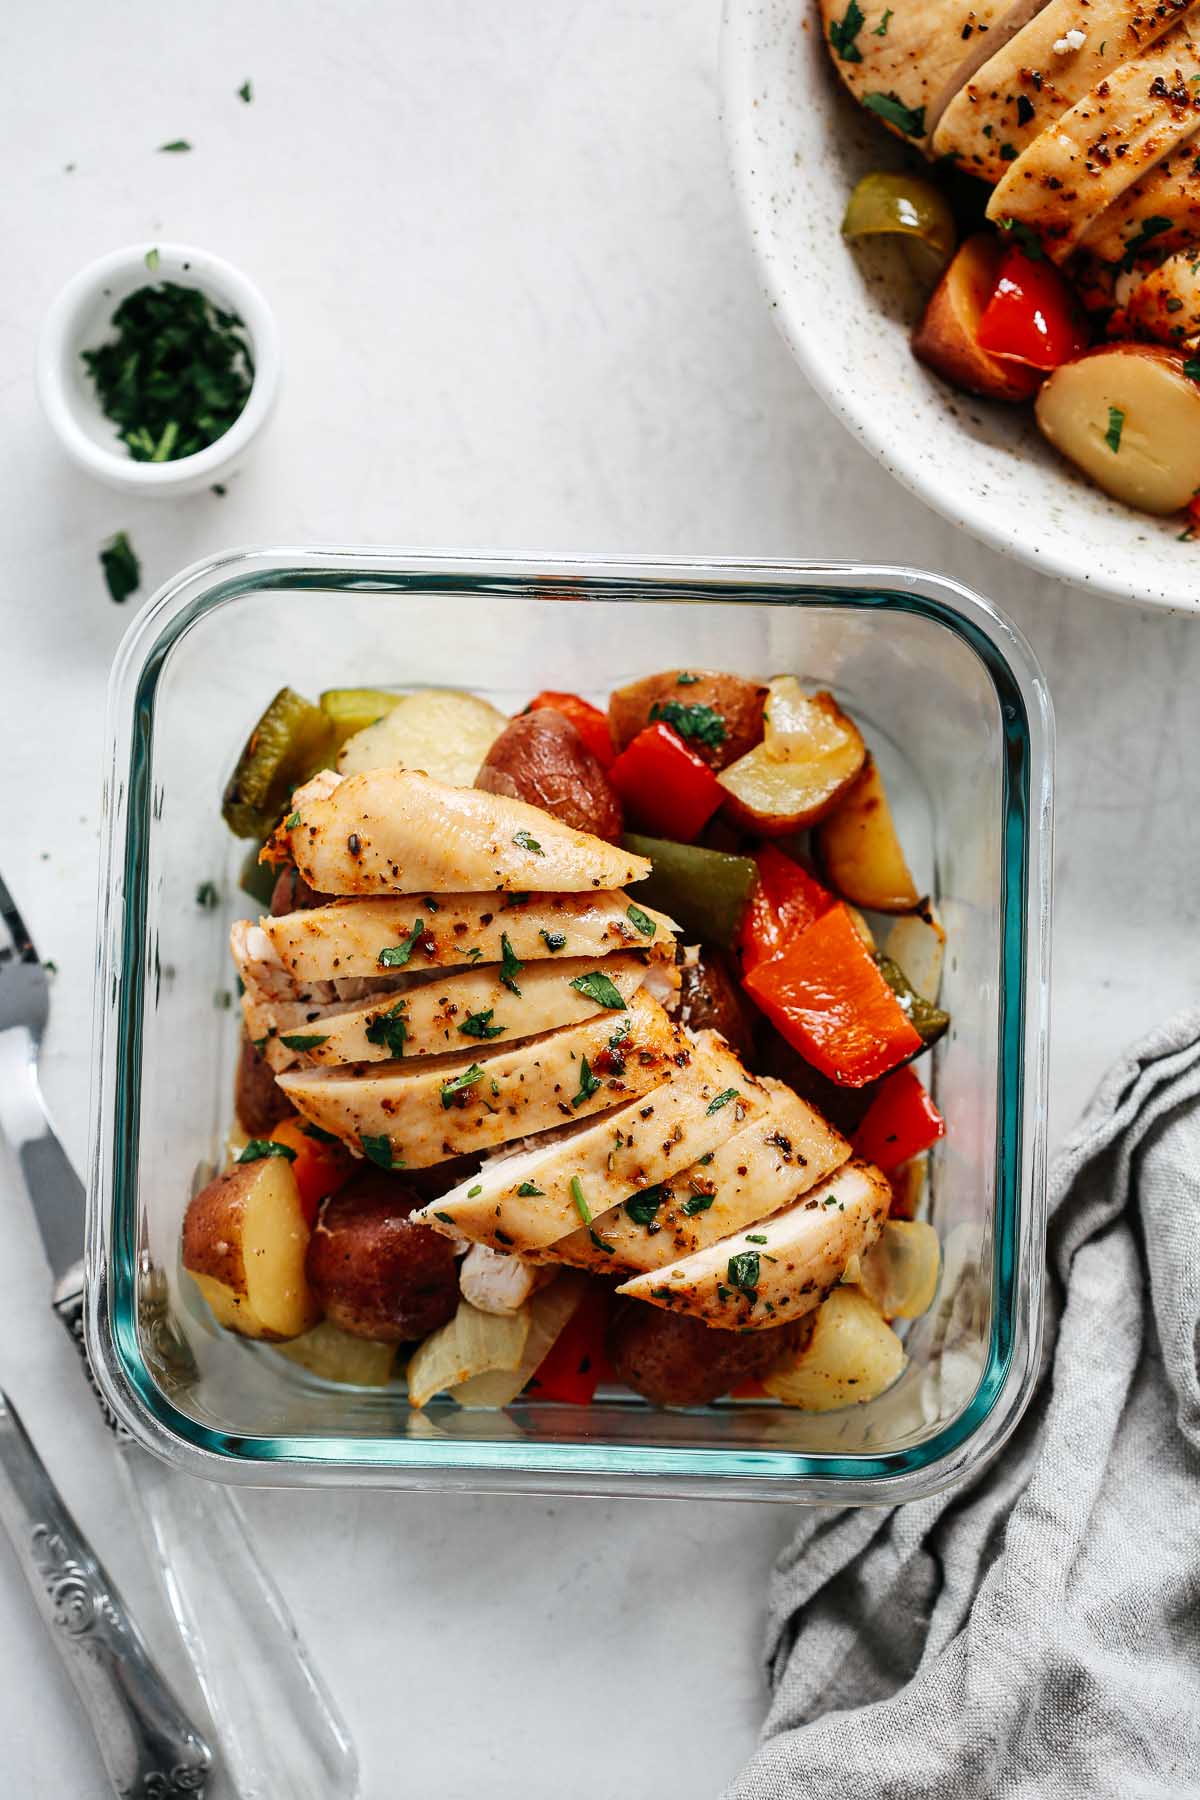 slices of roasted chicken breast in square meal prep container